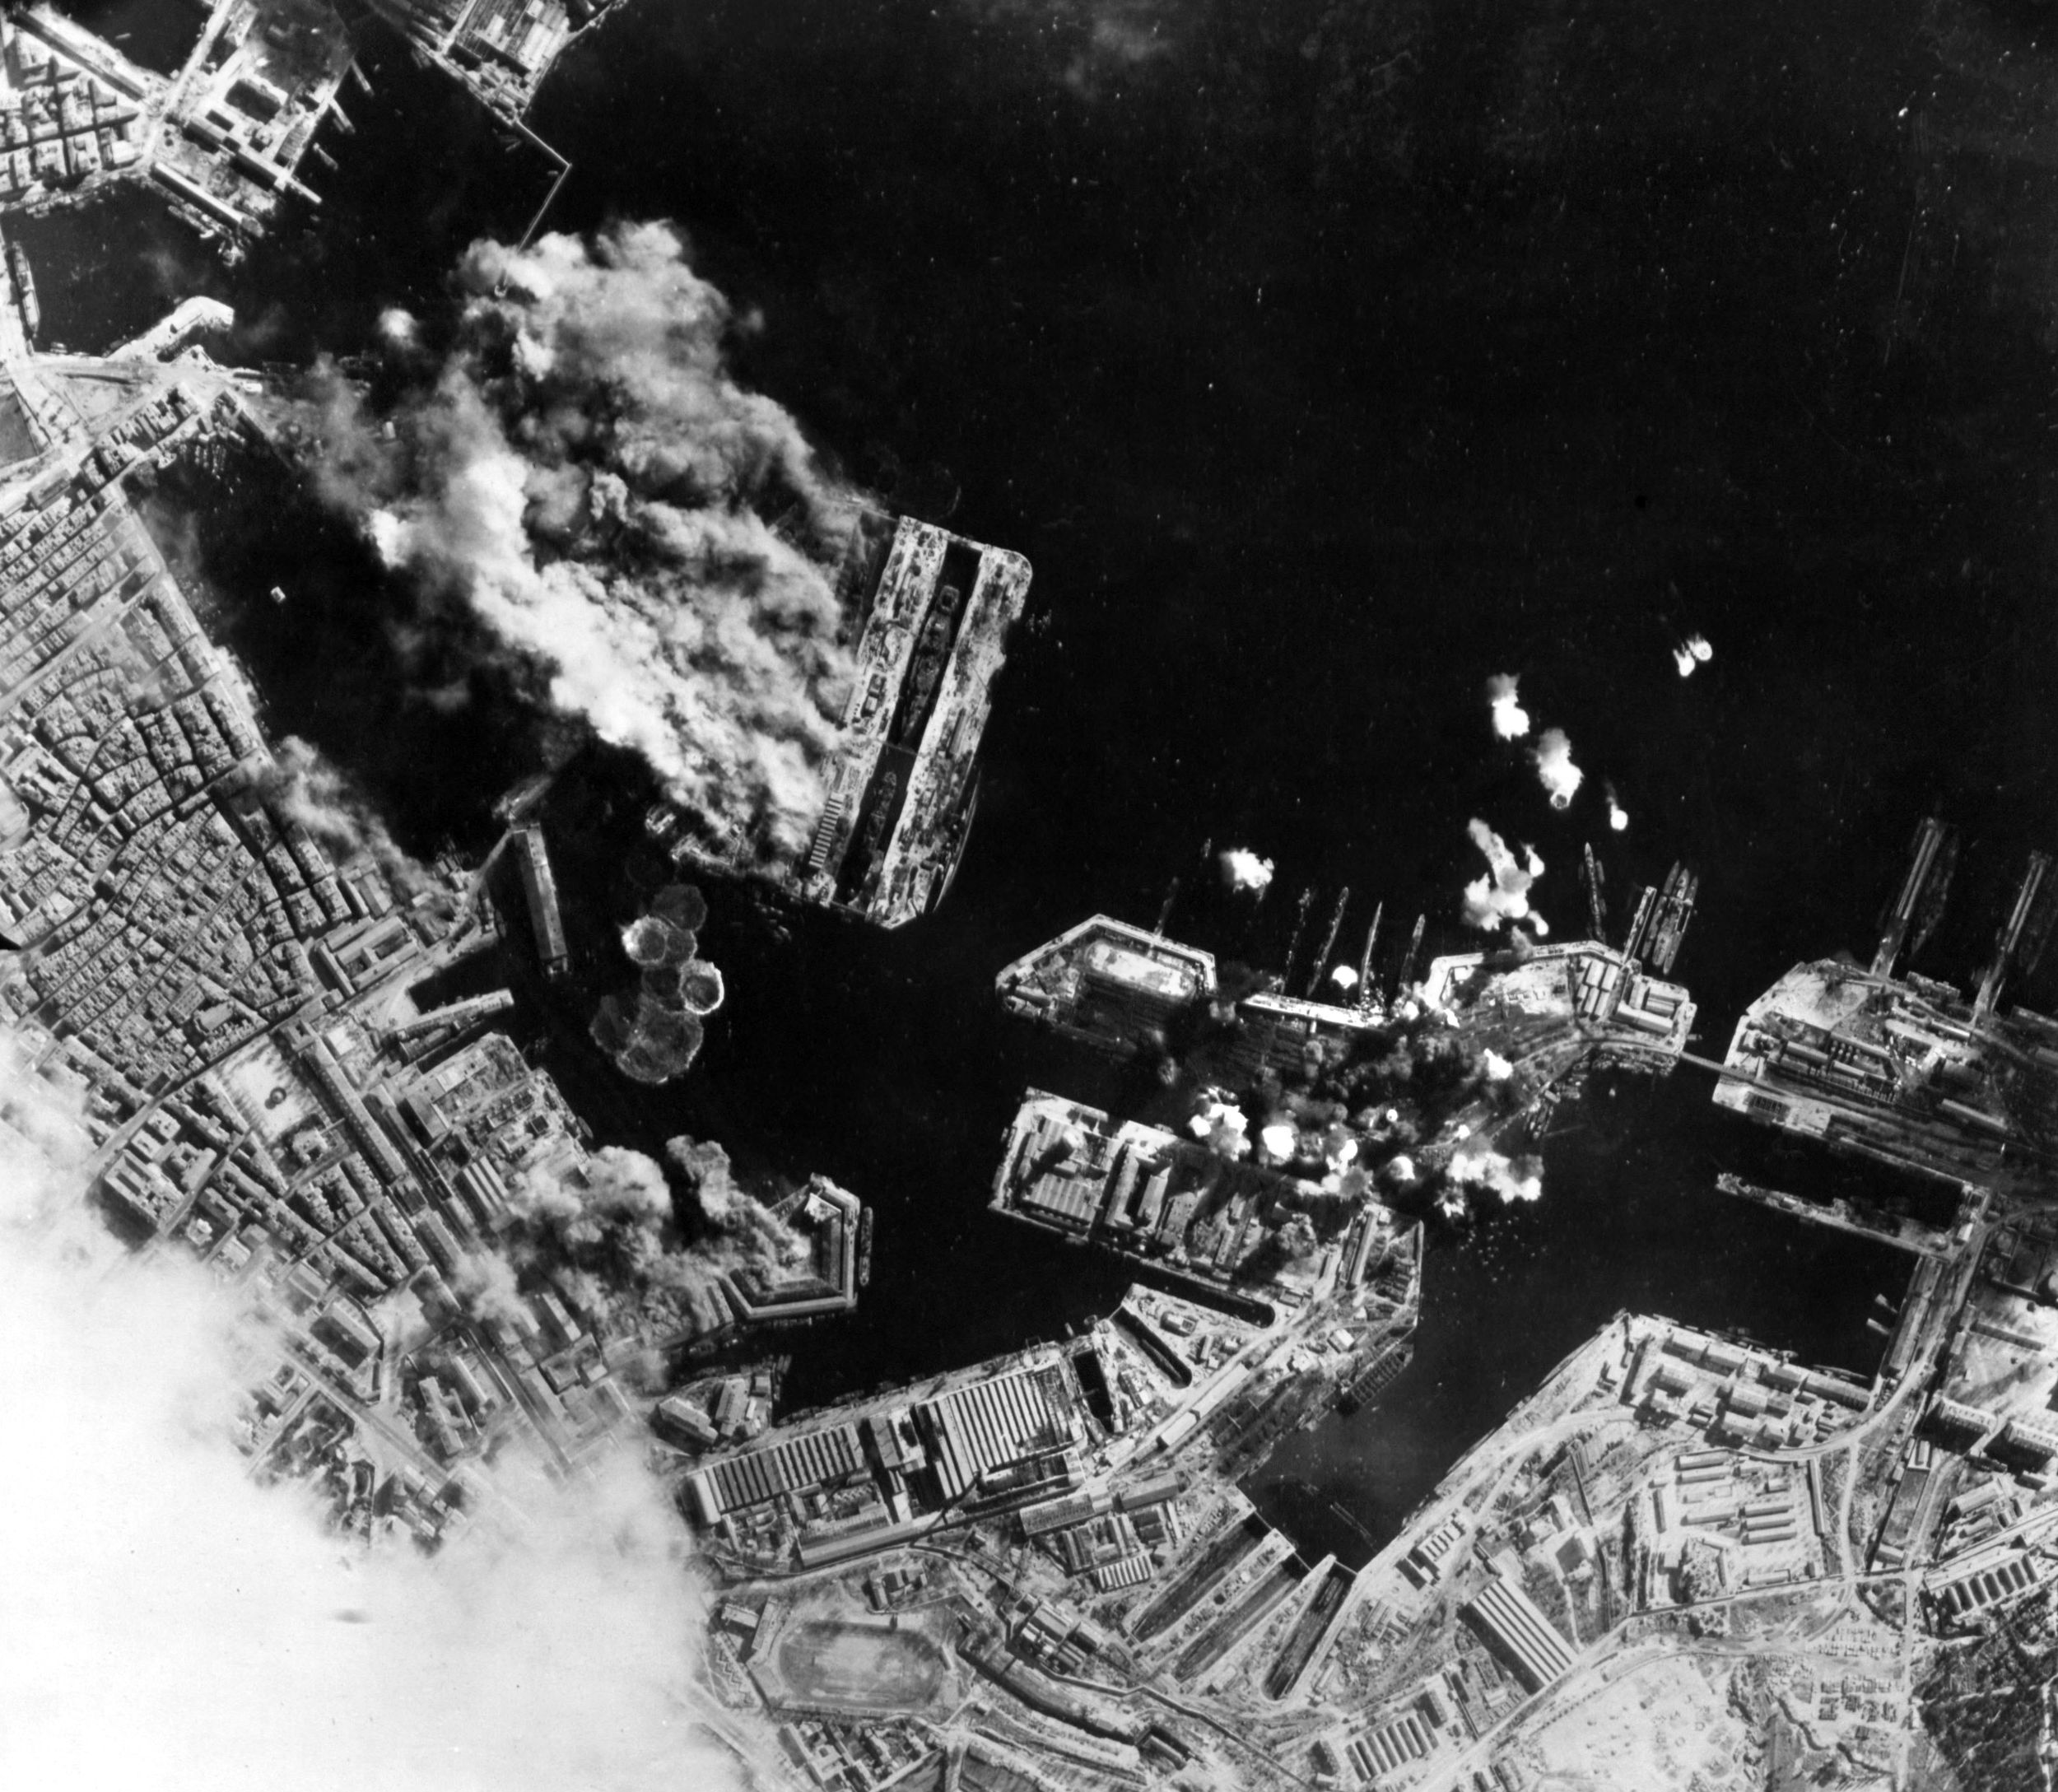 On February 4, 1944, Allied bombers of the U.S. Fifteenth Air Force struck the Nazi submarine base at Toulon in occupied France. Weather reports from Detachment G were critical to the success of the raid. This image shows the opening moments of the air assault as warehouses, a drydock, and other installations are seen being pounded by bombs.